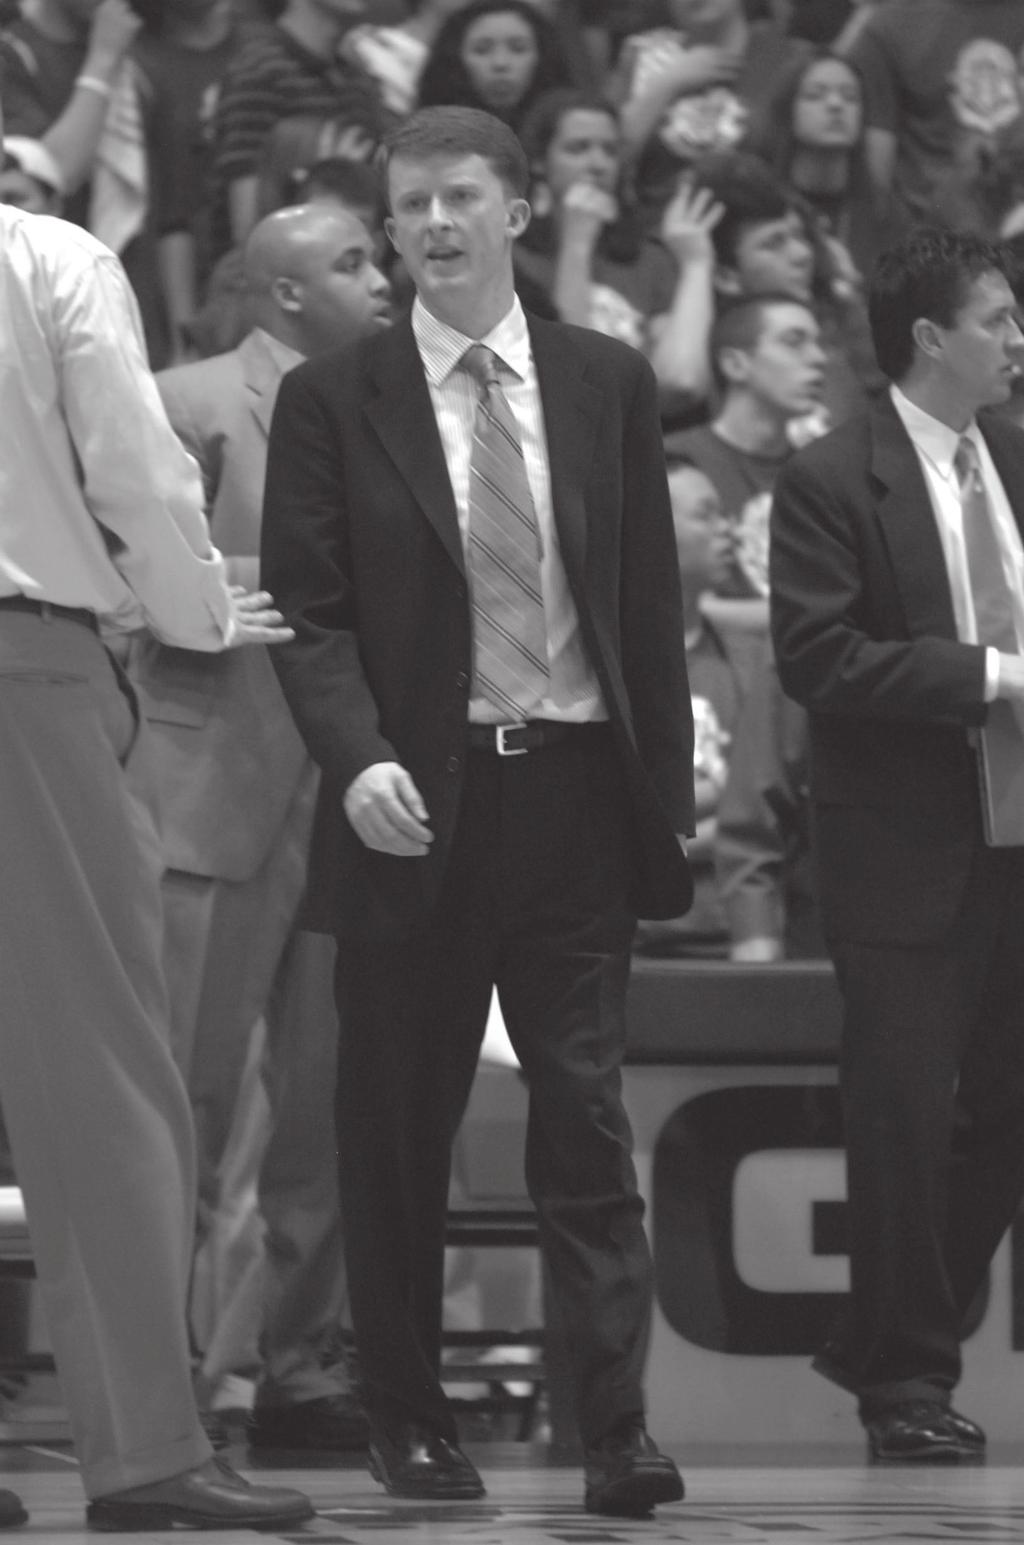 Prior to his appointment at AU, Donohue spent two seasons as an Administrative Assistant for the men s basketball program at Boston University.